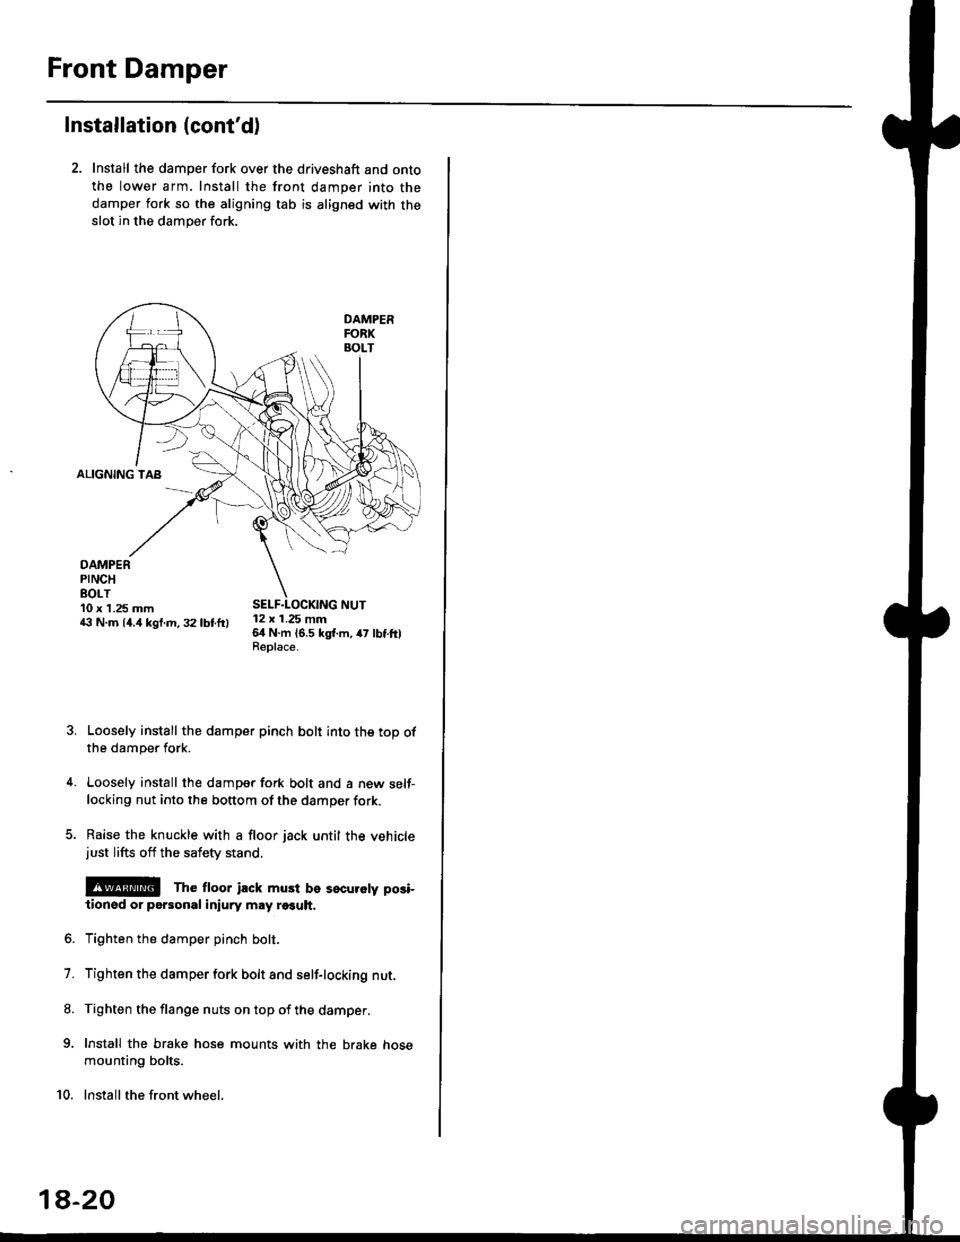 HONDA CIVIC 1996 6.G Owners Guide Front Damper
Installation (contd)
2. Install the damper fork over the driveshaft and onto
the lower arm. Install the front damper into the
damper fork so the aligning tab is aligned with the
slot in 